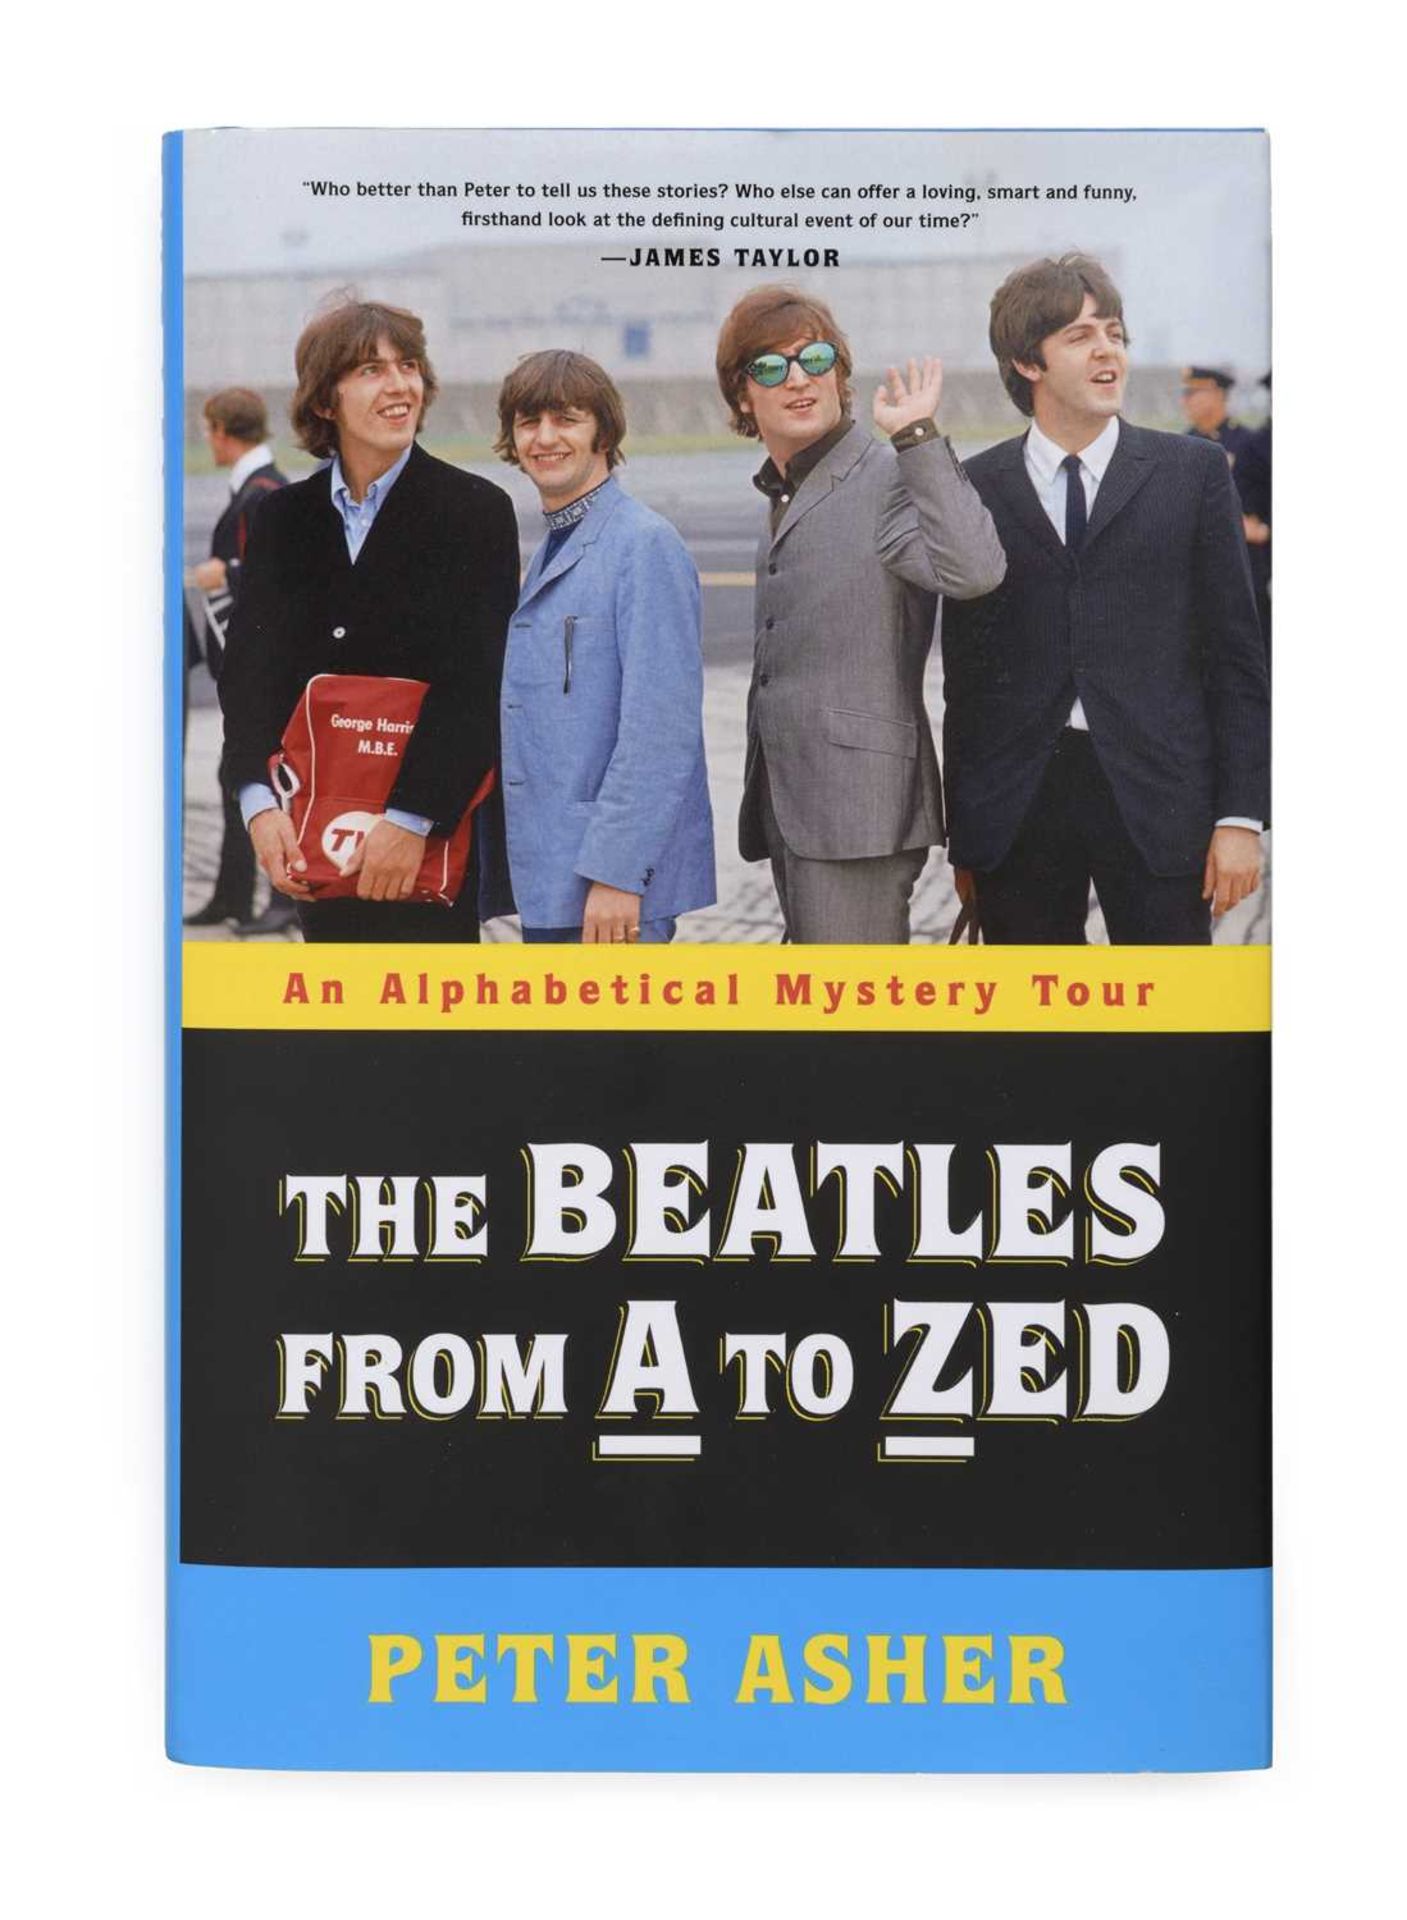 The Beatles From A to Zed Book by Peter Asher Signed Peter Asher met the Beatles in the spring of